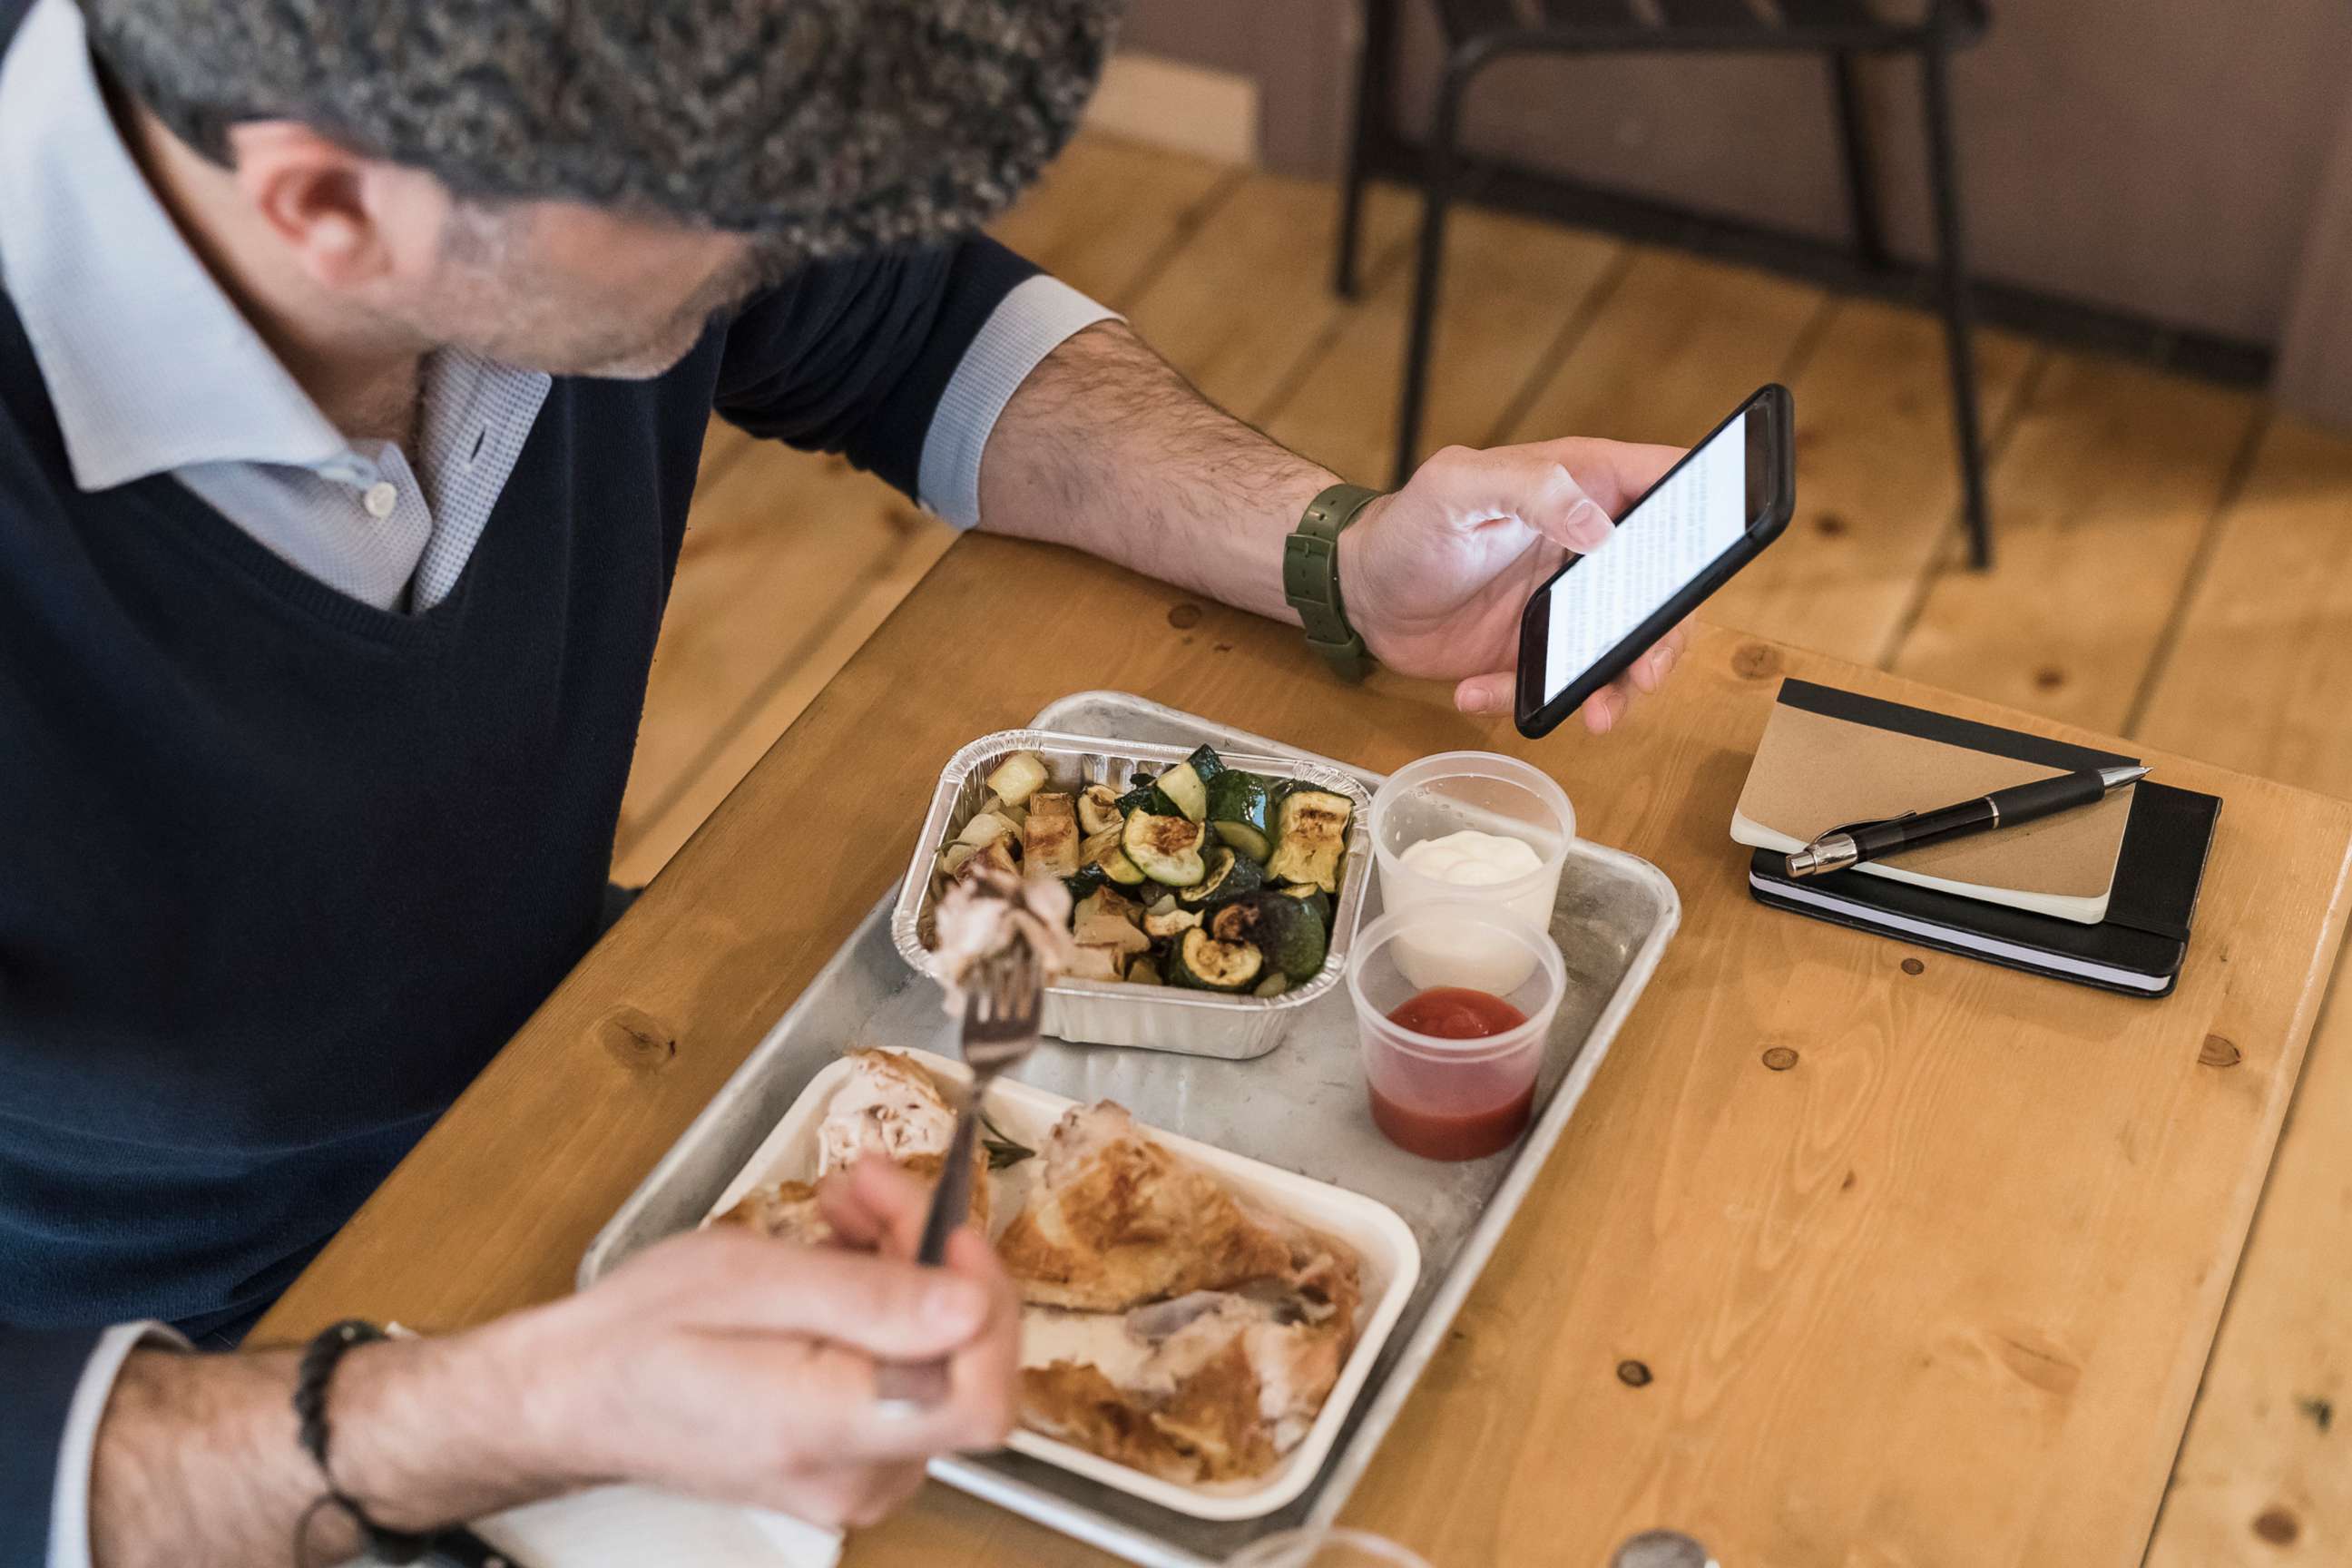 PHOTO: An undated stock photo shows a person holding a smart phone while eating.